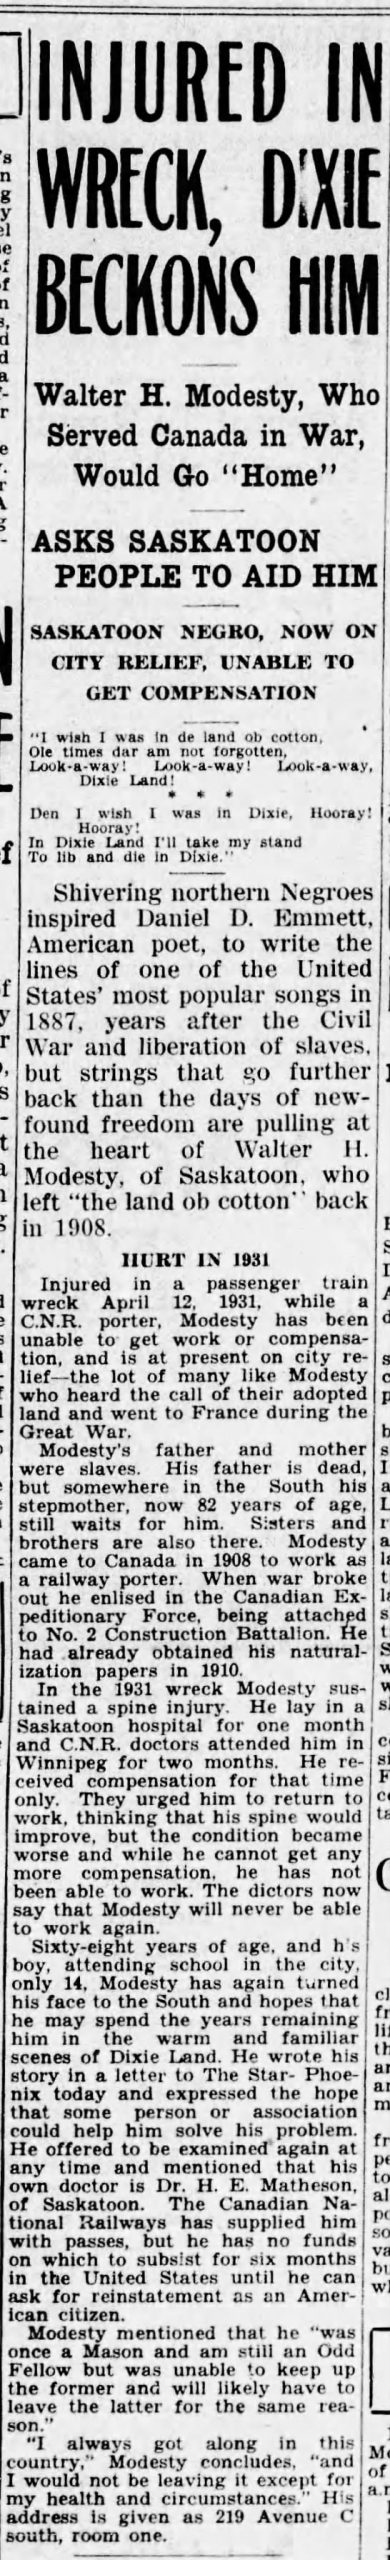 Black and white scan of a vintage newspaper clipping. The article is long and narrow, with the headline INJURED IN WRECK, DIXIE BECKONS HIM in large letters at the top. There are three subheadings and three sets of paragraphs below.